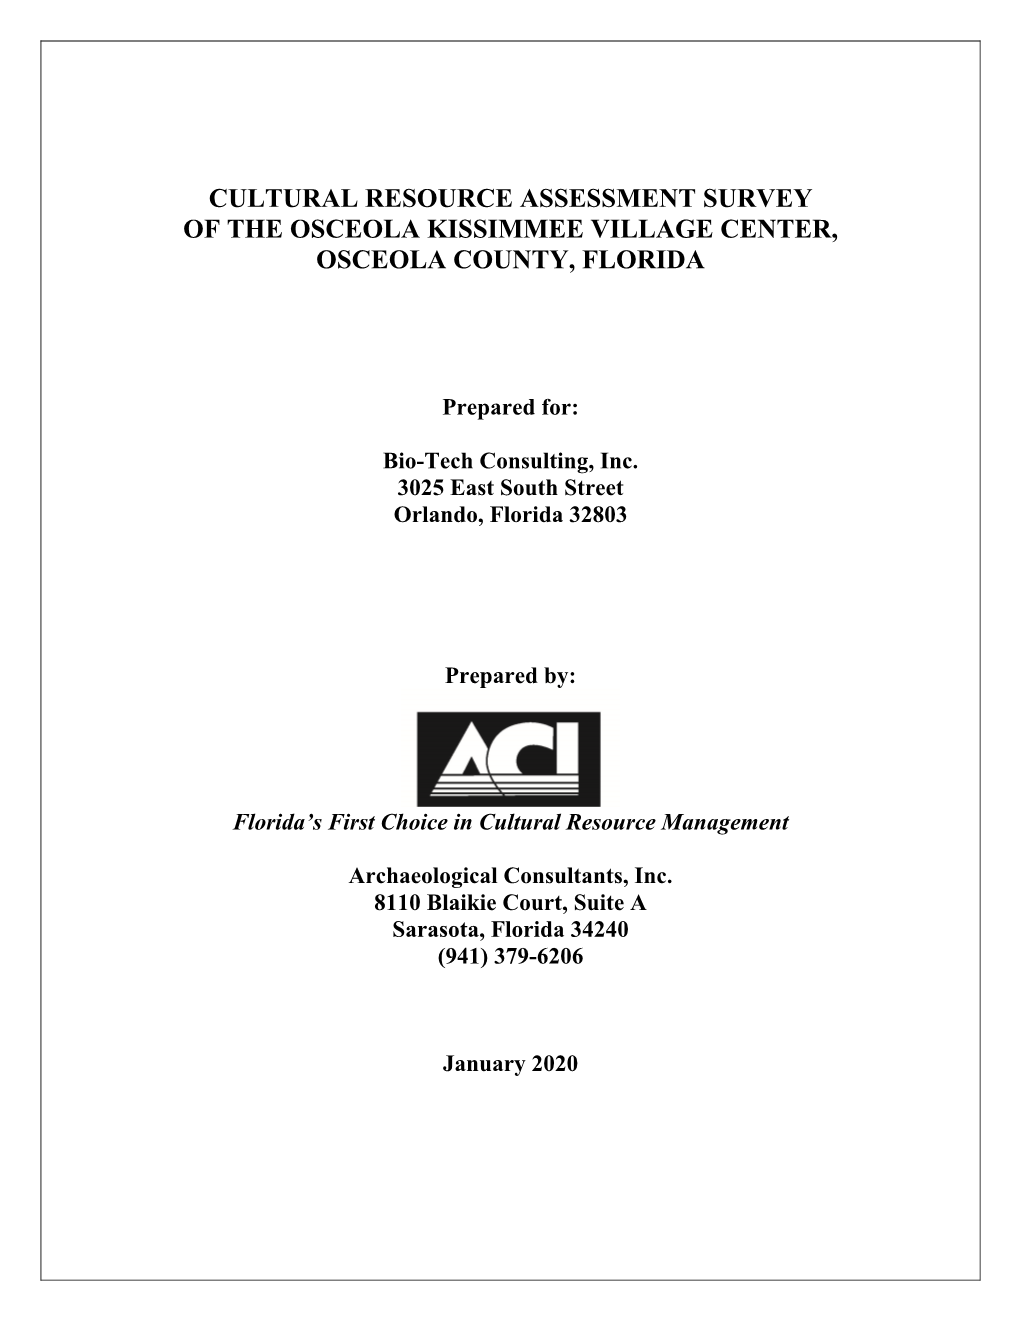 Cultural Resource Assessment Survey of the Osceola Kissimmee Village Center, Osceola County, Florida